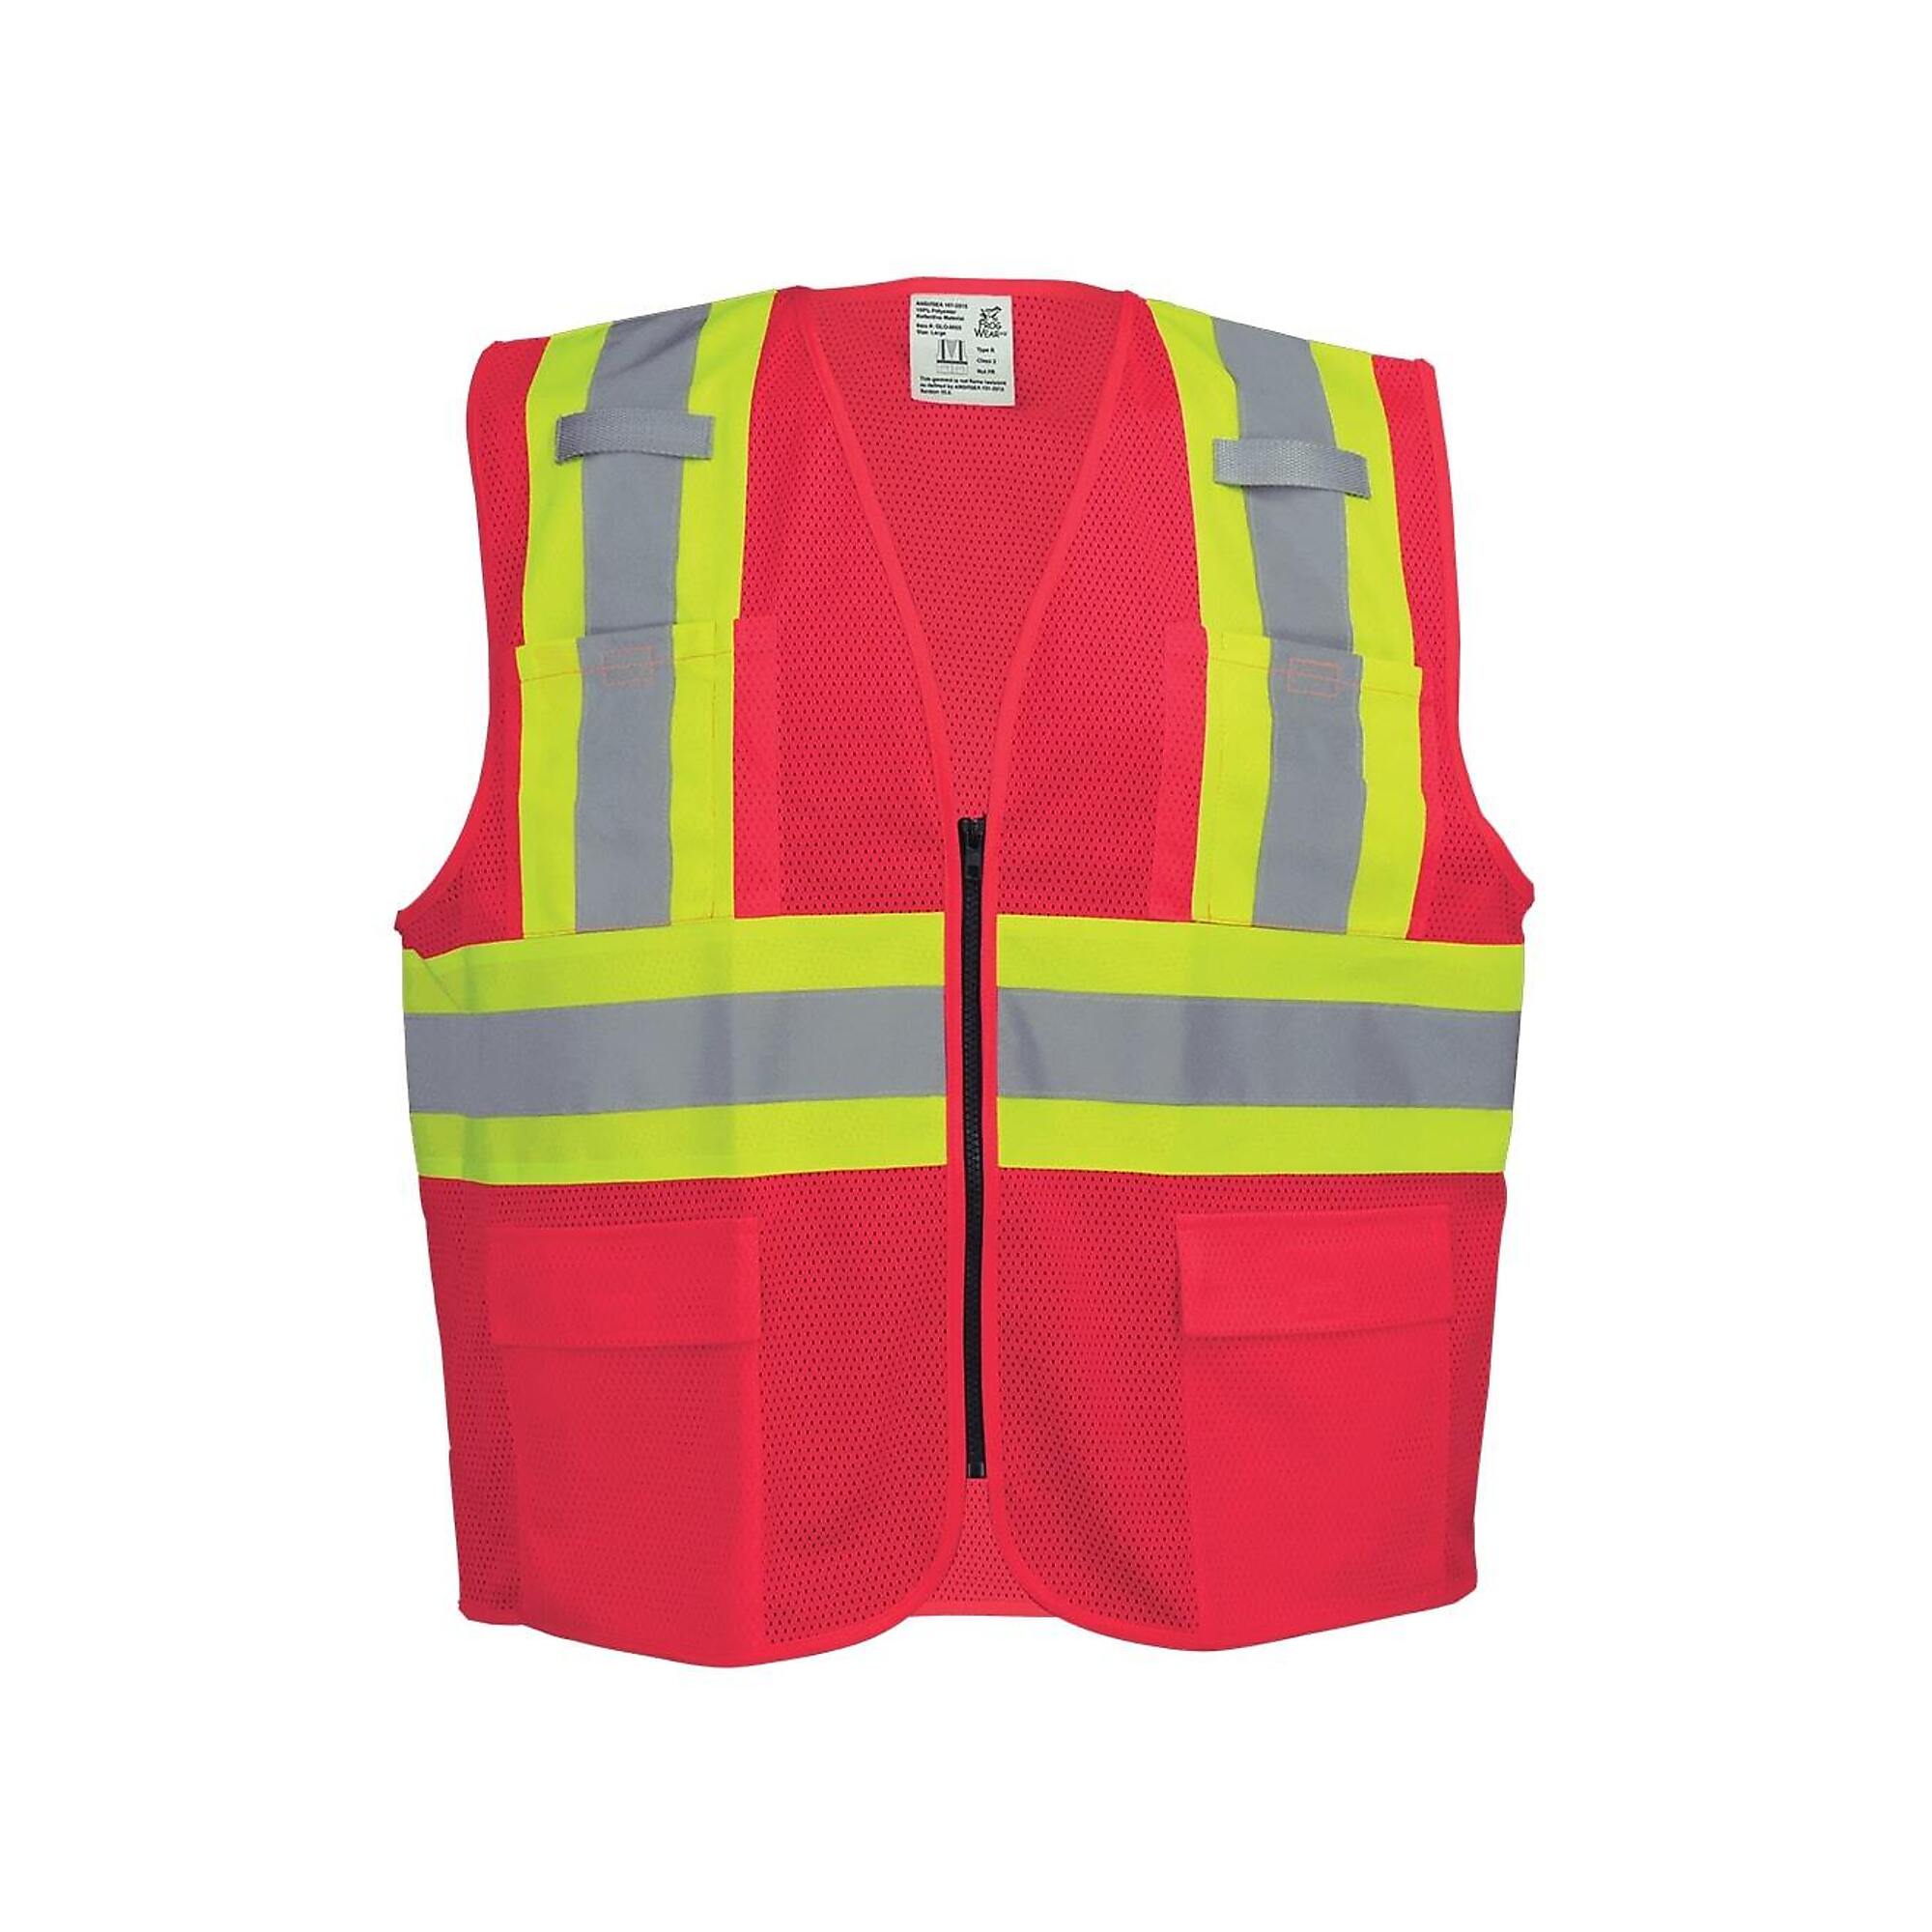 FrogWear, HV Red, Class 2 6 Pockets, Mesh Vest, Size L, Color High-Visibility Red, Model GLO-0055-L